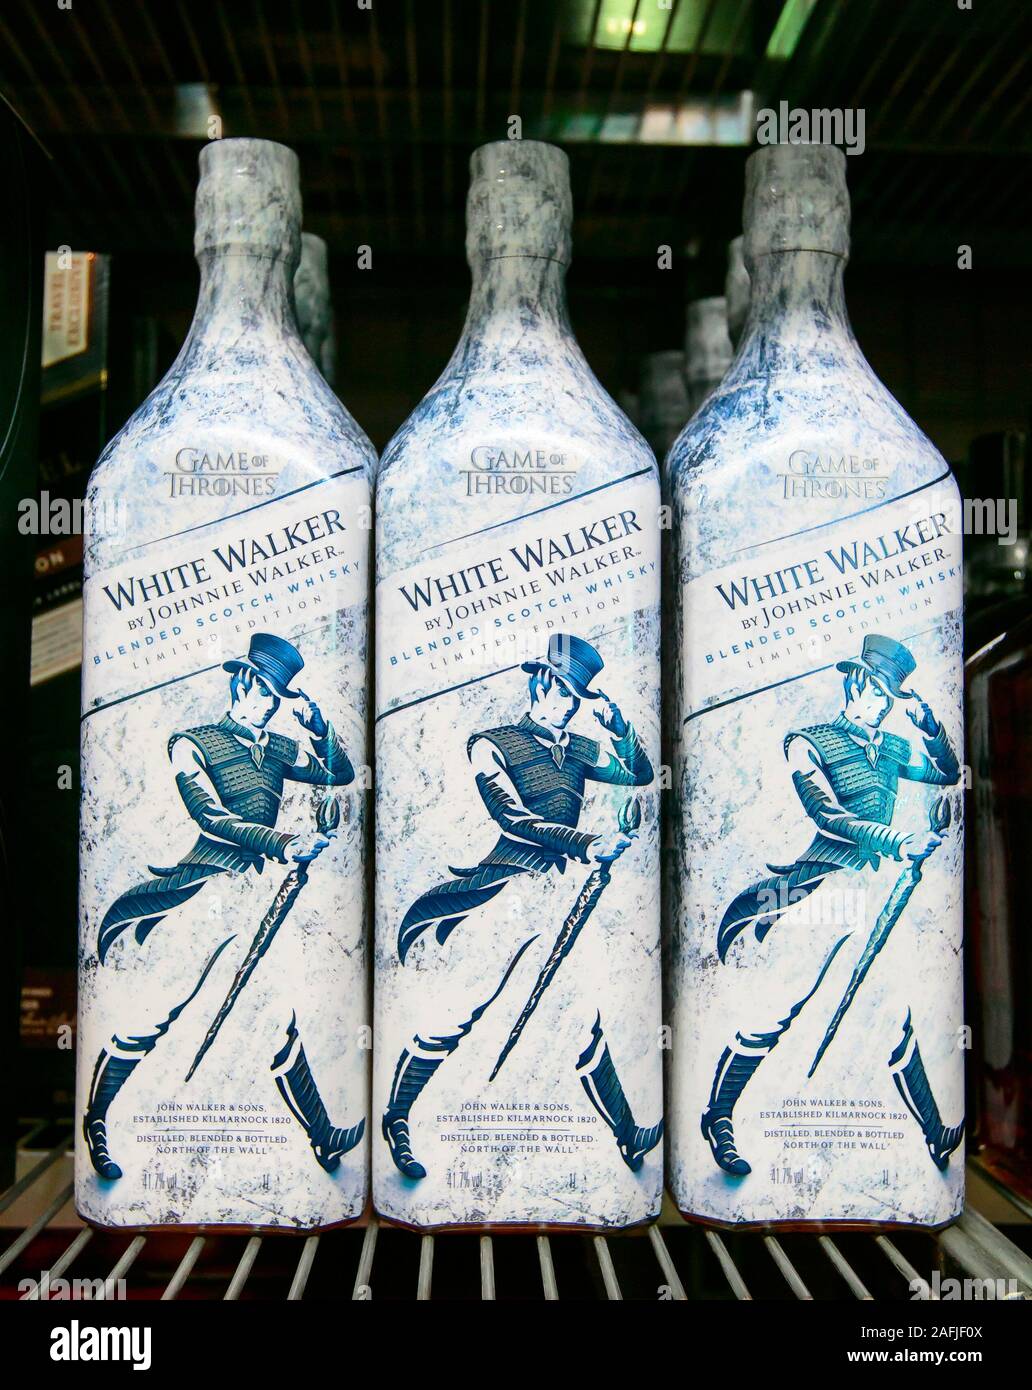 Aruba, 12/2/2019: Bottles of Johnnie Walker whiskey in Game of Thrones themed special packaging stand on a shelf in a liquor store. Stock Photo